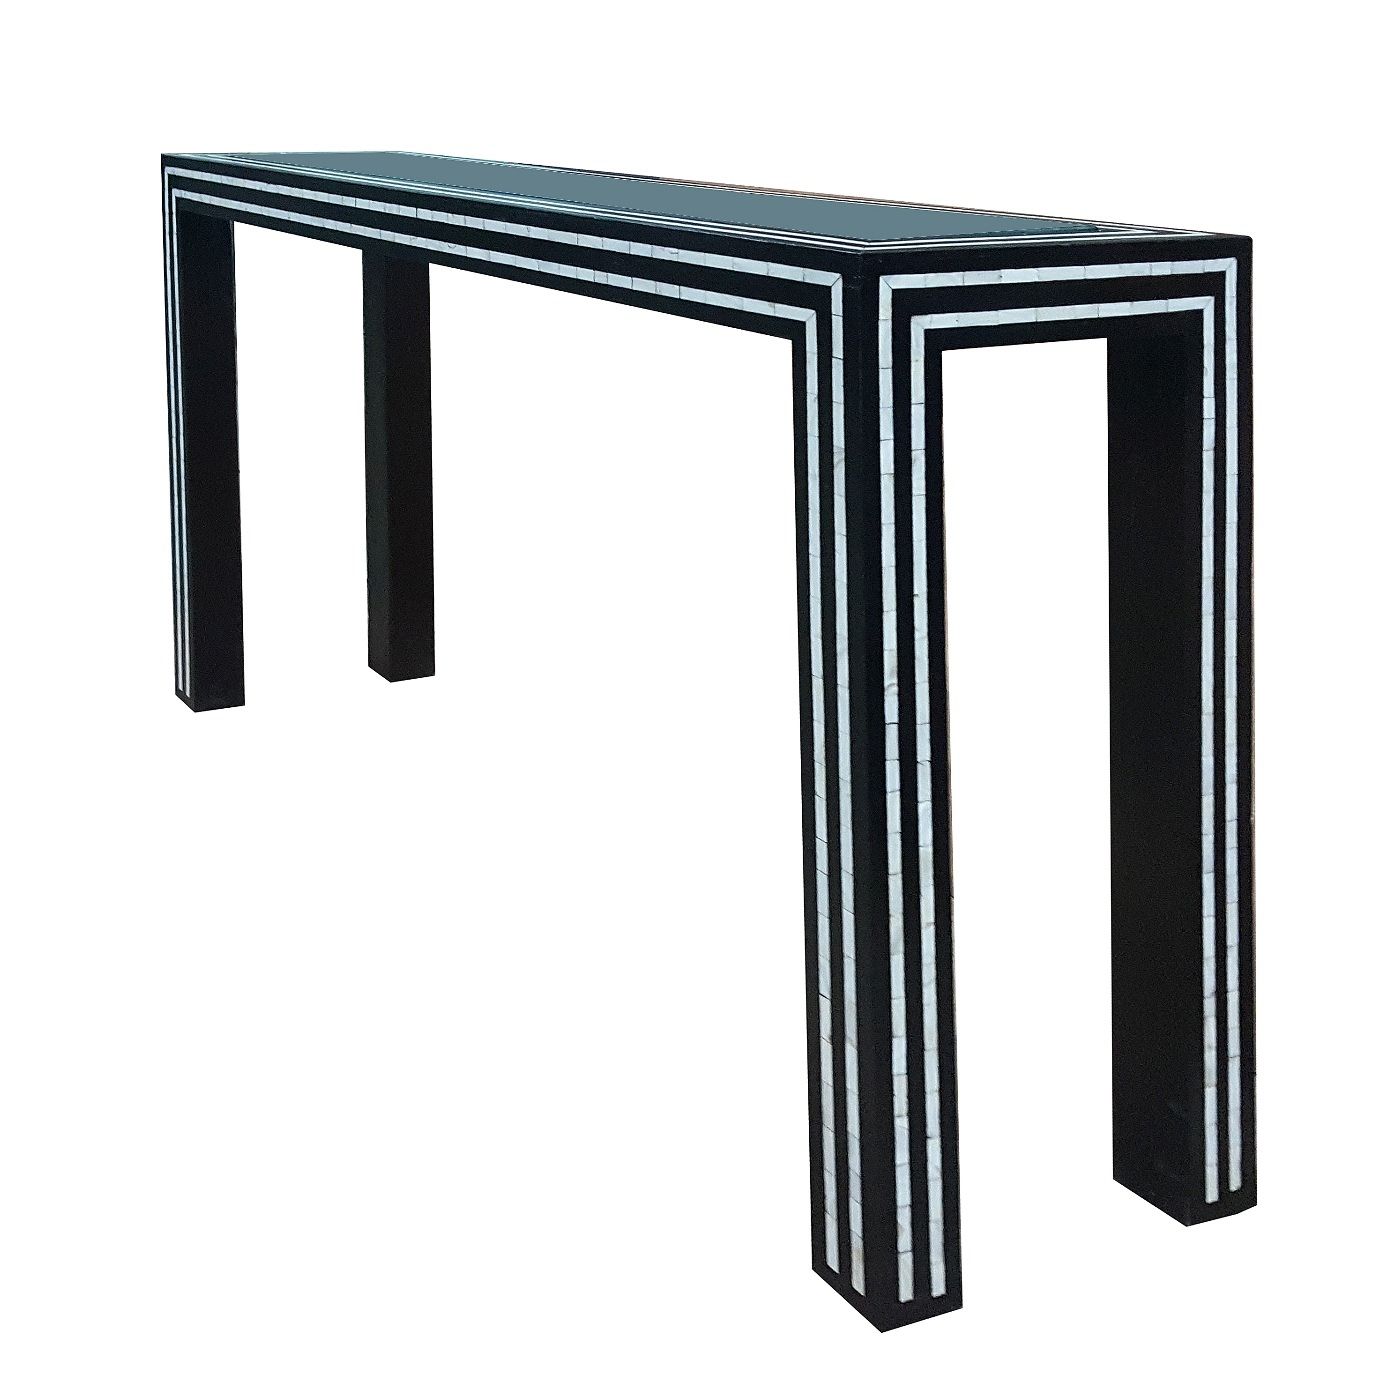 Black And White Pearl Inlay Console: Glass And Inlay Console Table With Black And White Inlay Console Tables (View 12 of 30)